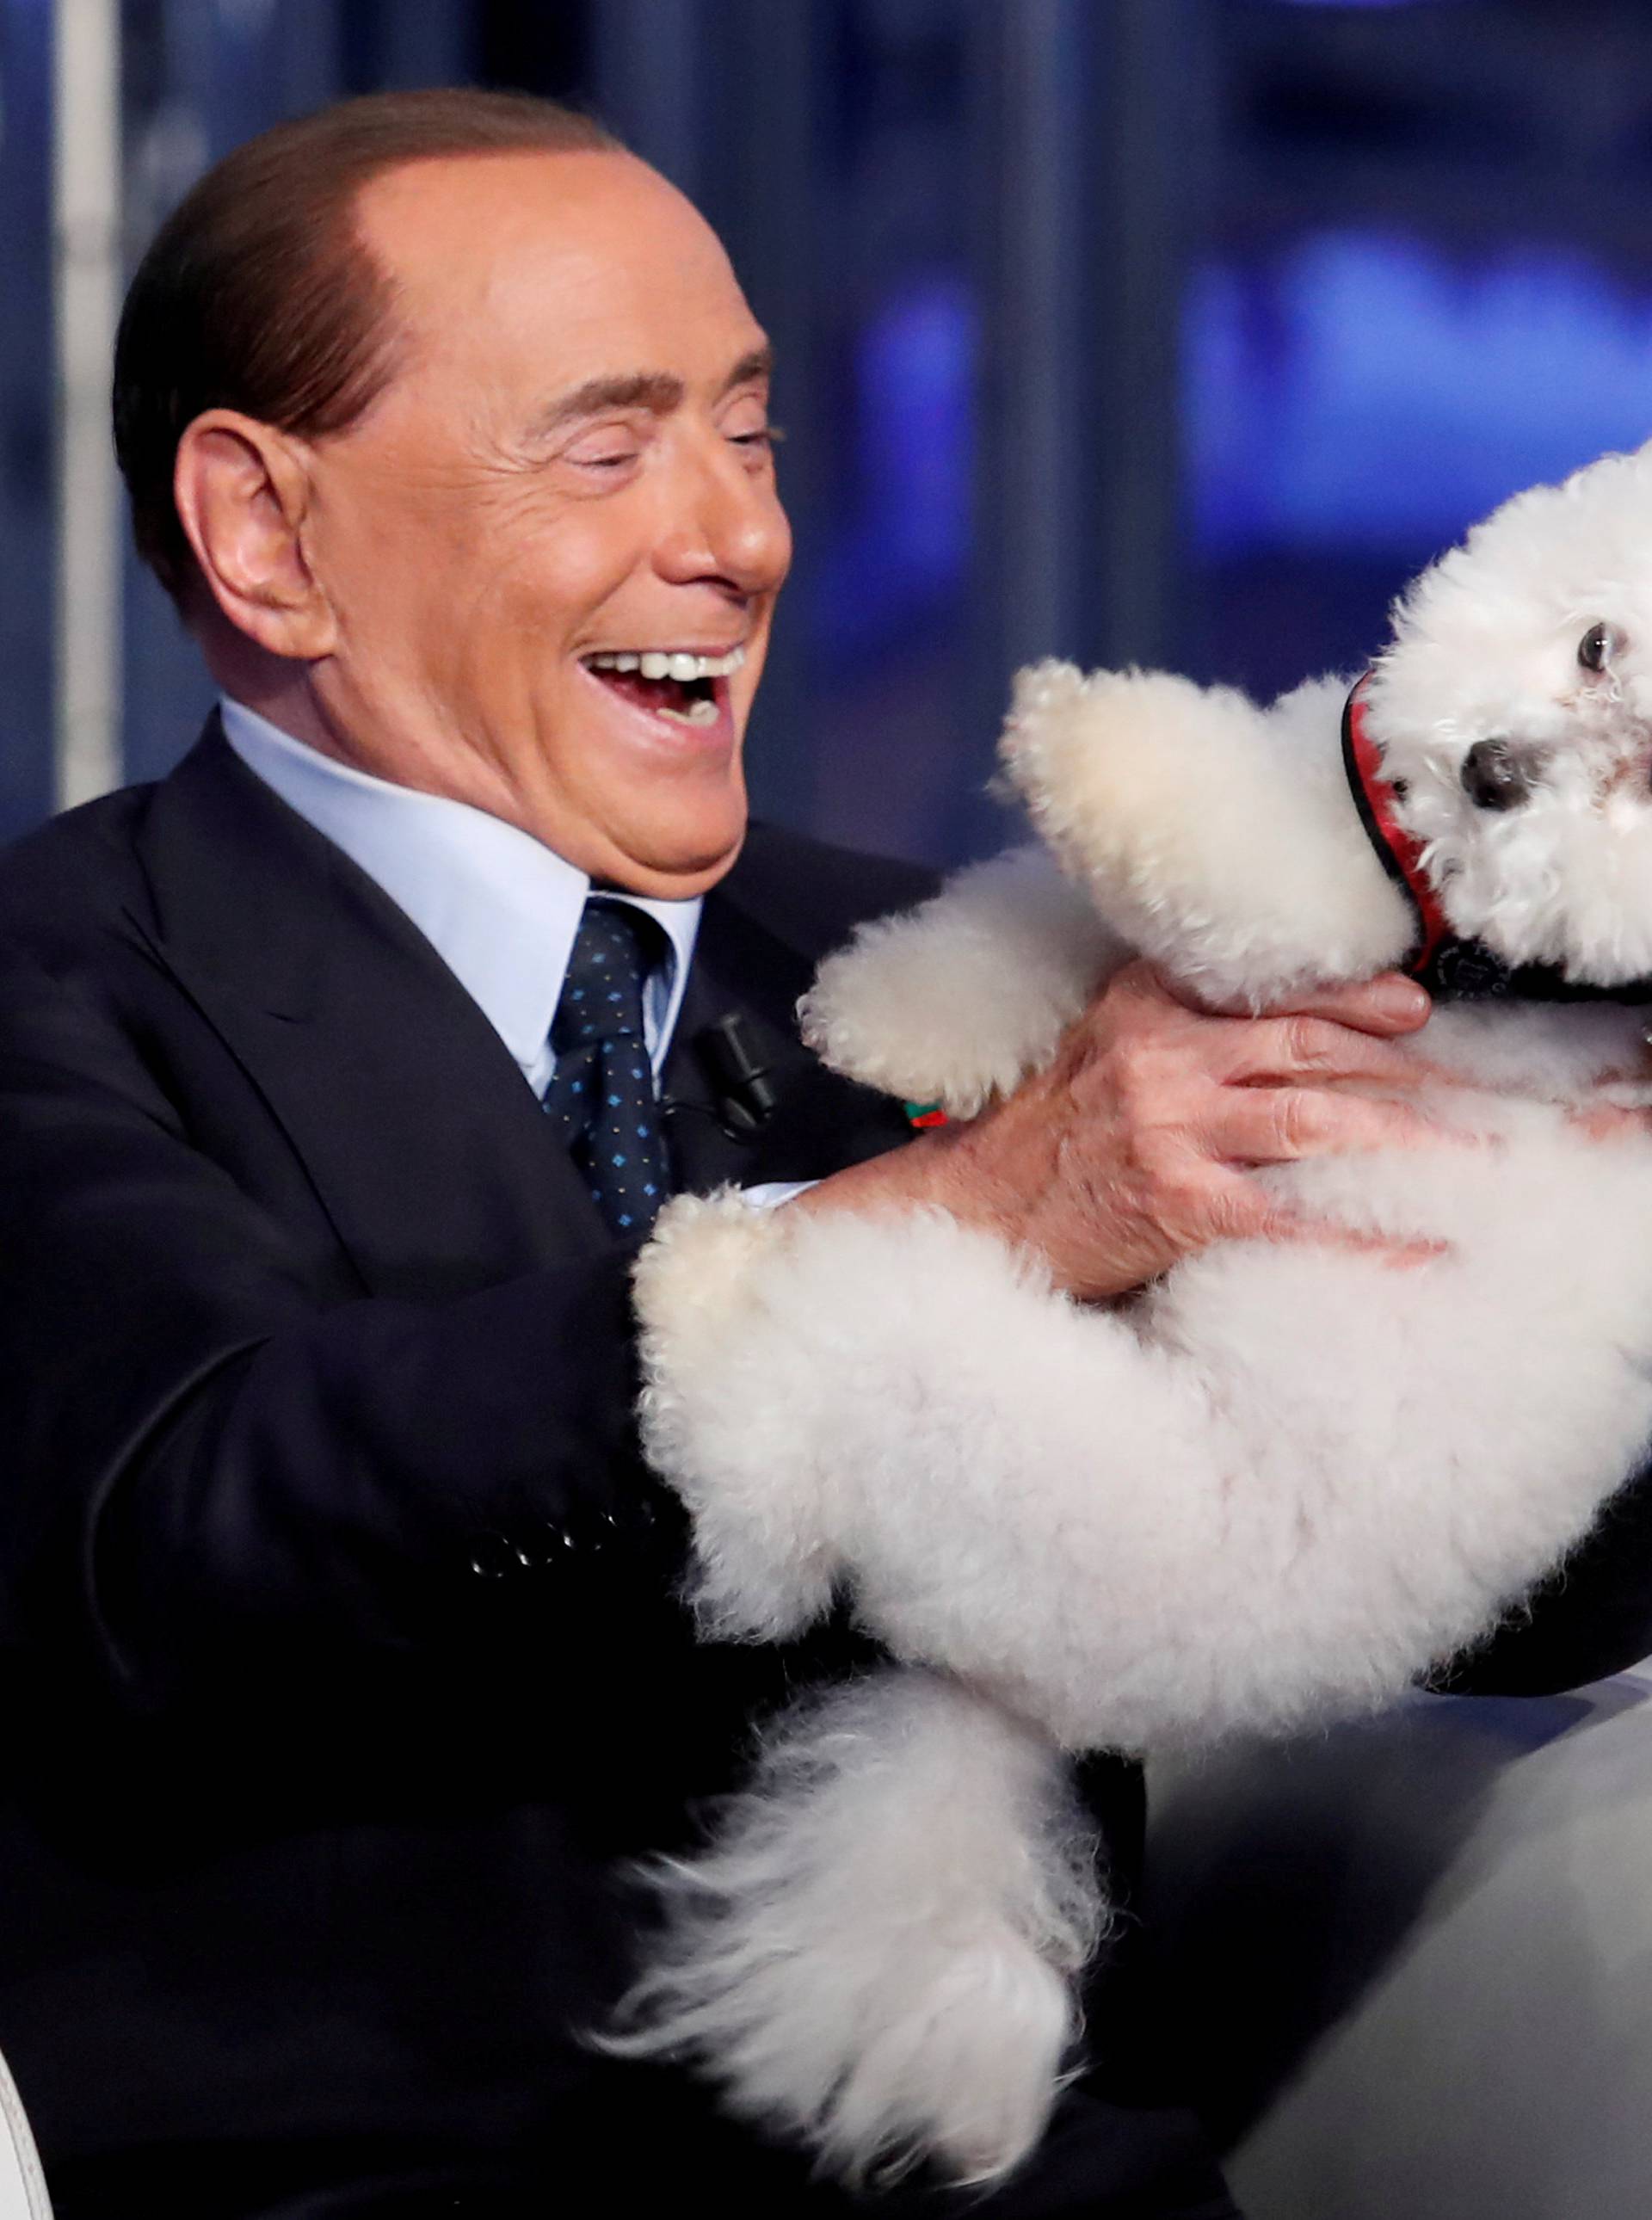 FILE PHOTO: Italy's former PM Berlusconi plays with a dog during the television talk show "Porta a Porta" in Rome